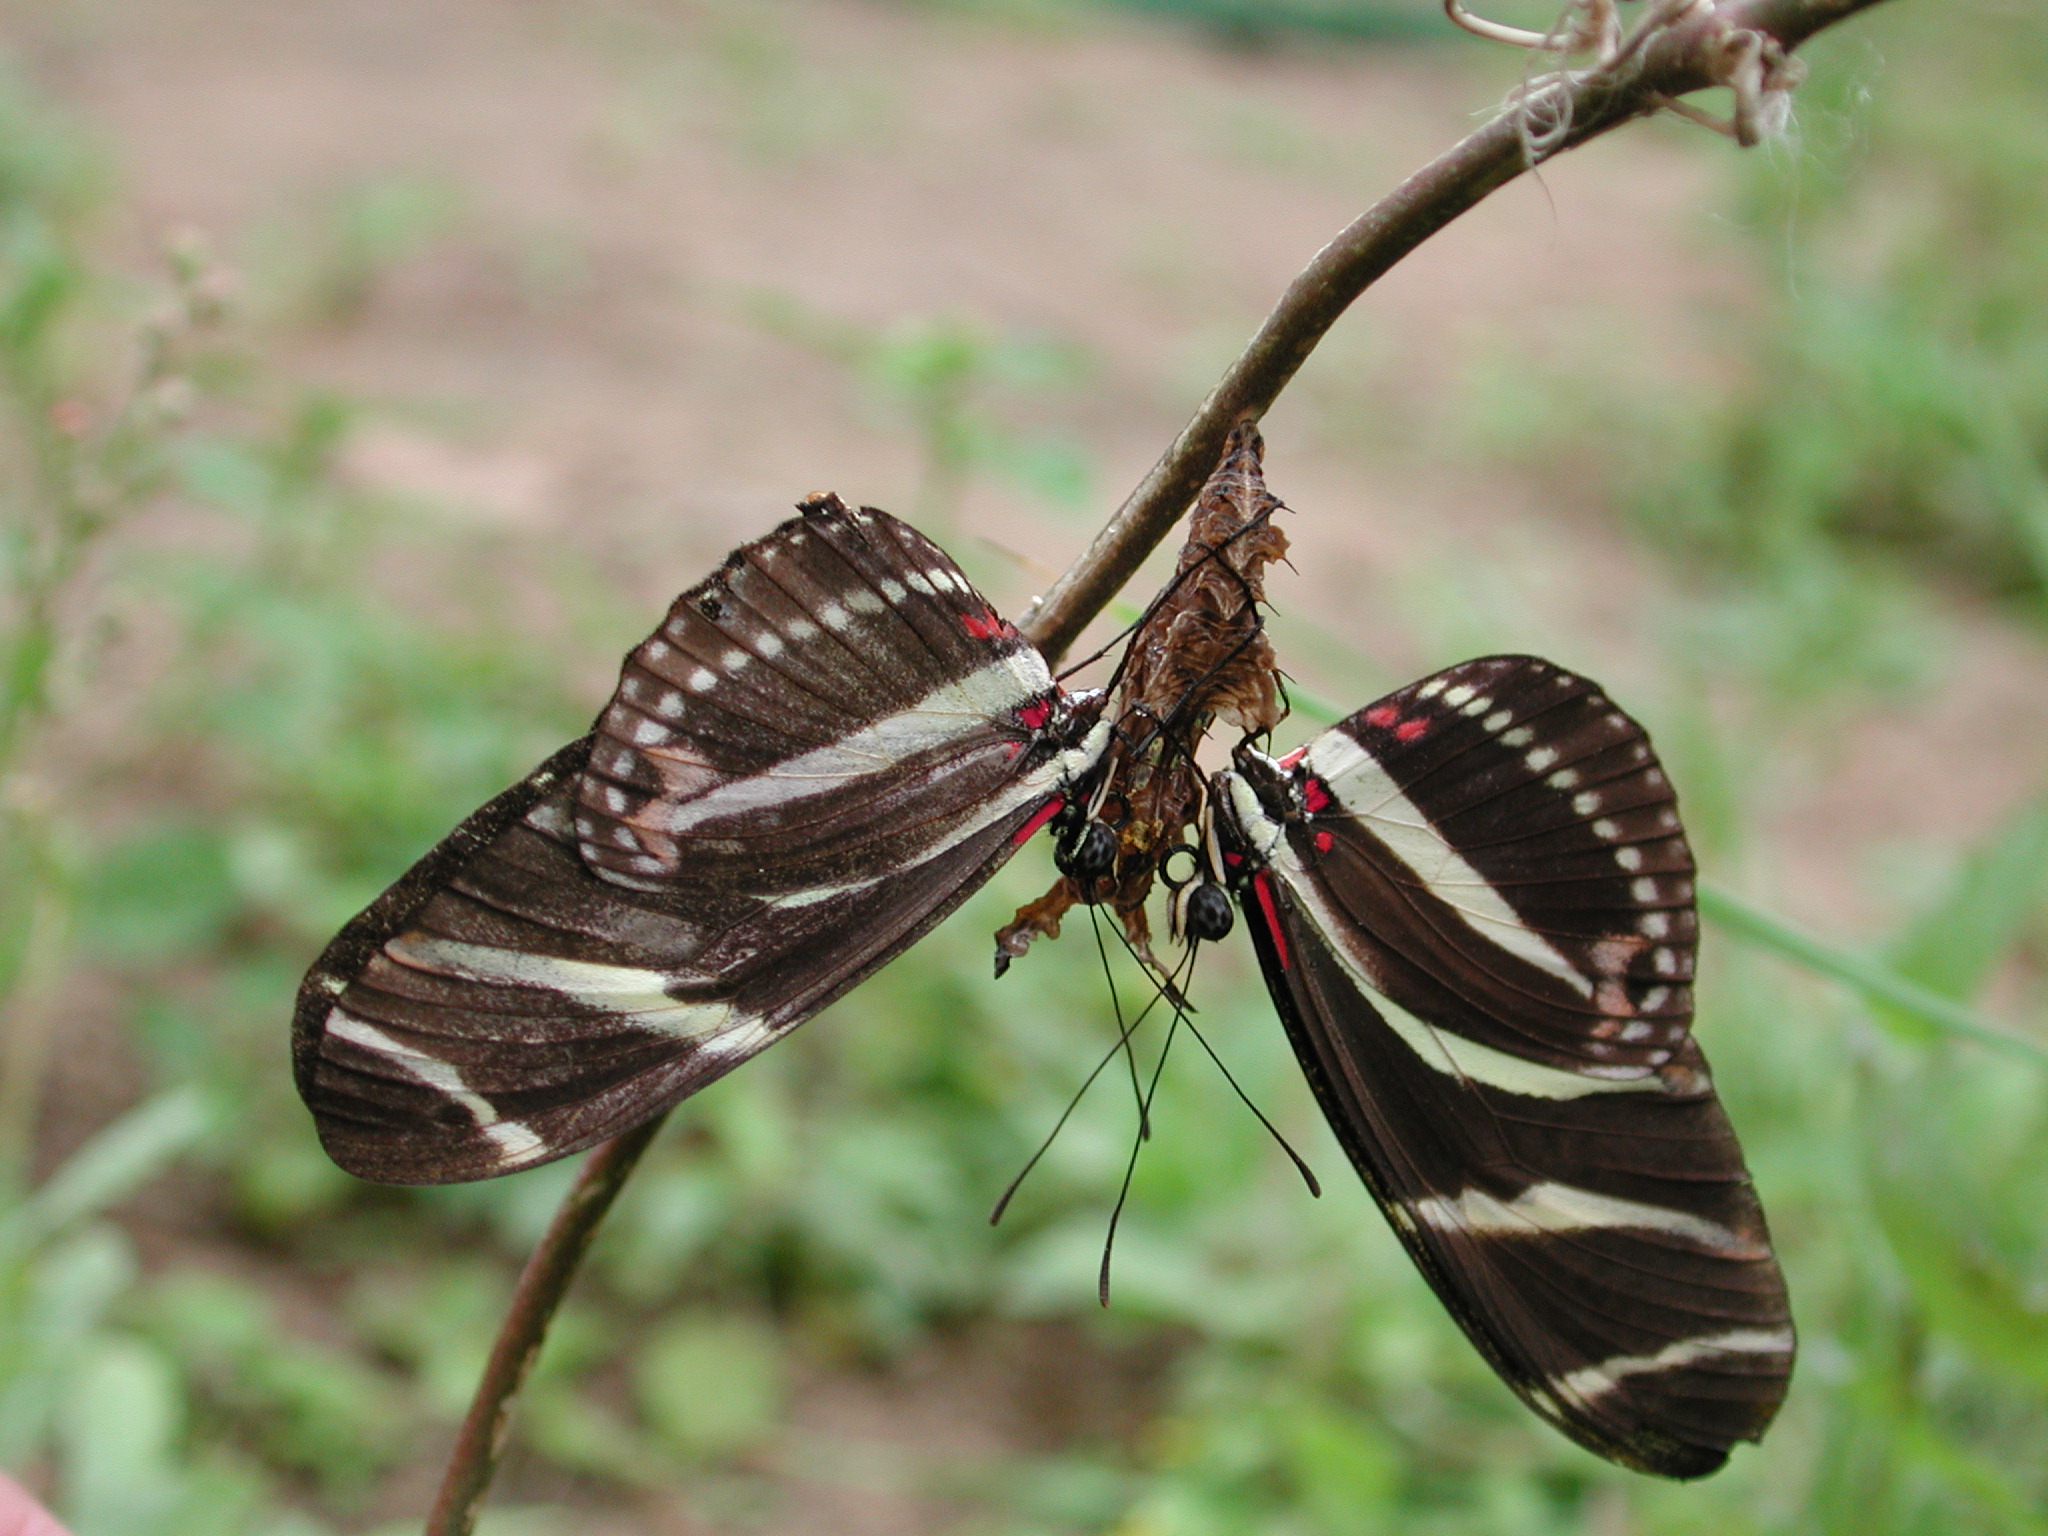 Two male butterflies with black and white striped wings sit on a the pupal case of a female butterfly